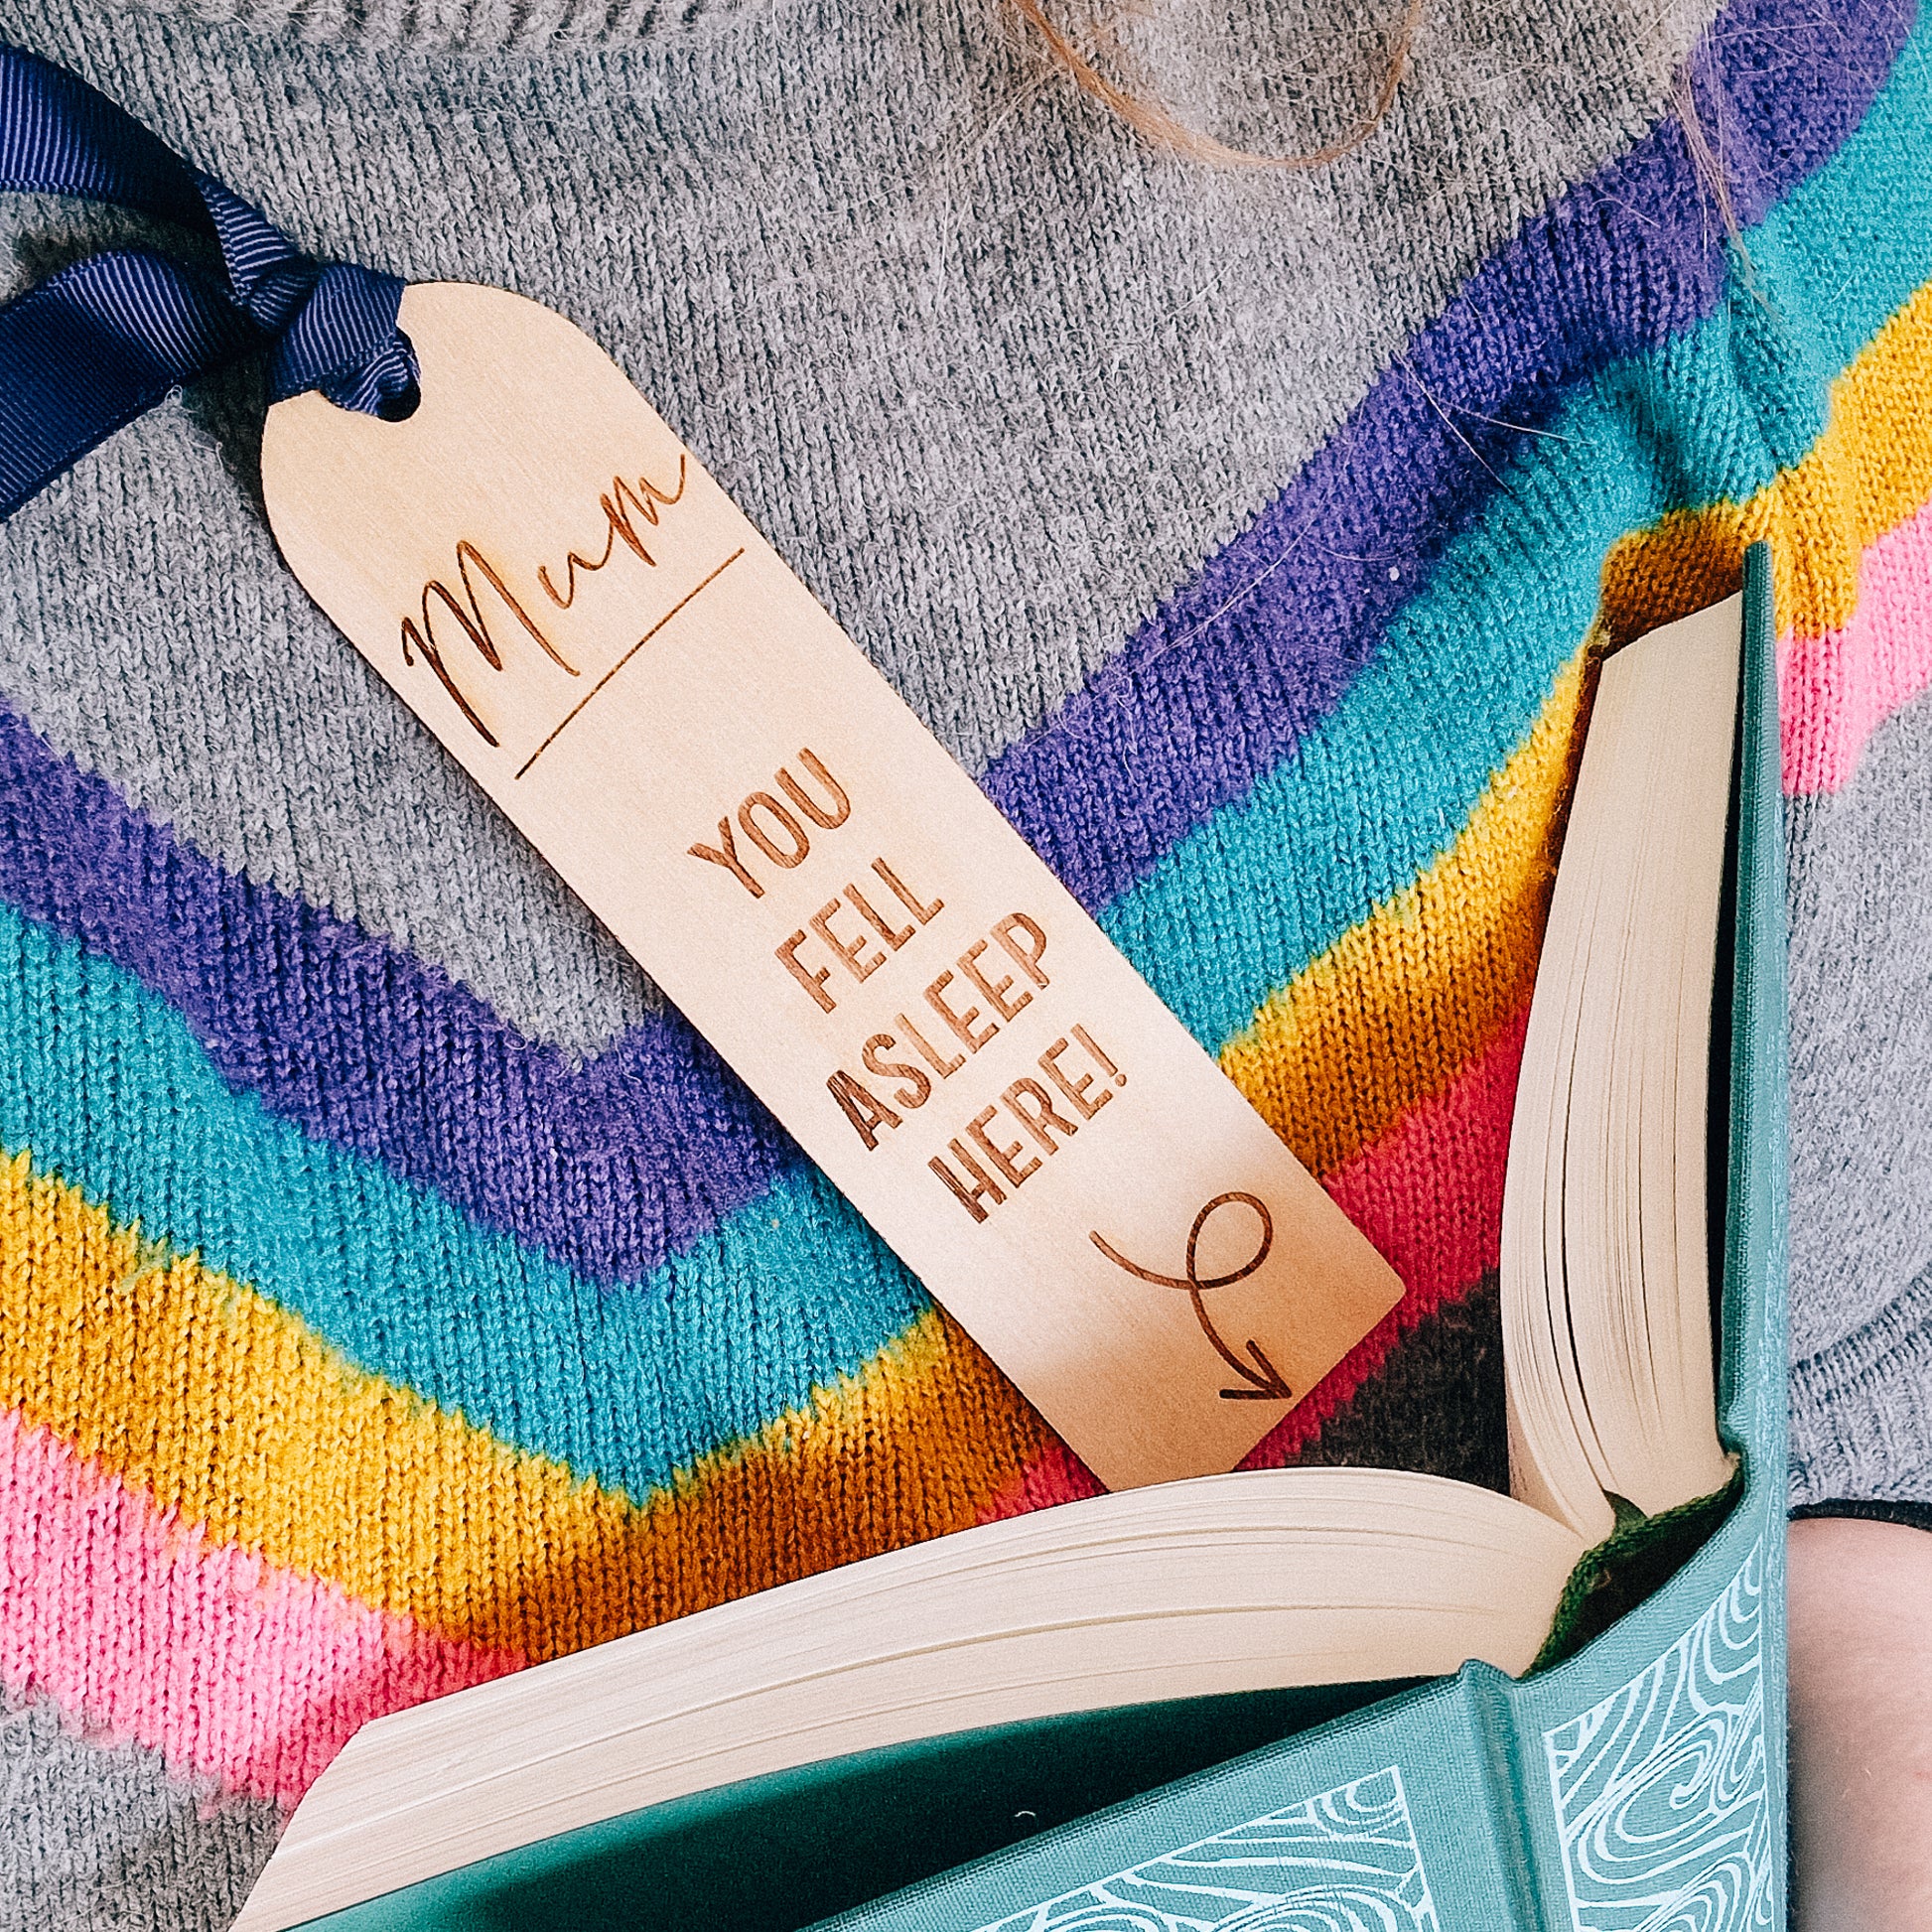 Personalized wooden bookmark engraved with "Mum, you fell asleep here" and an arrow pointing to the bottom. The bookmark rests on a person sleeping with an open book with a navy blue ribbon attached.